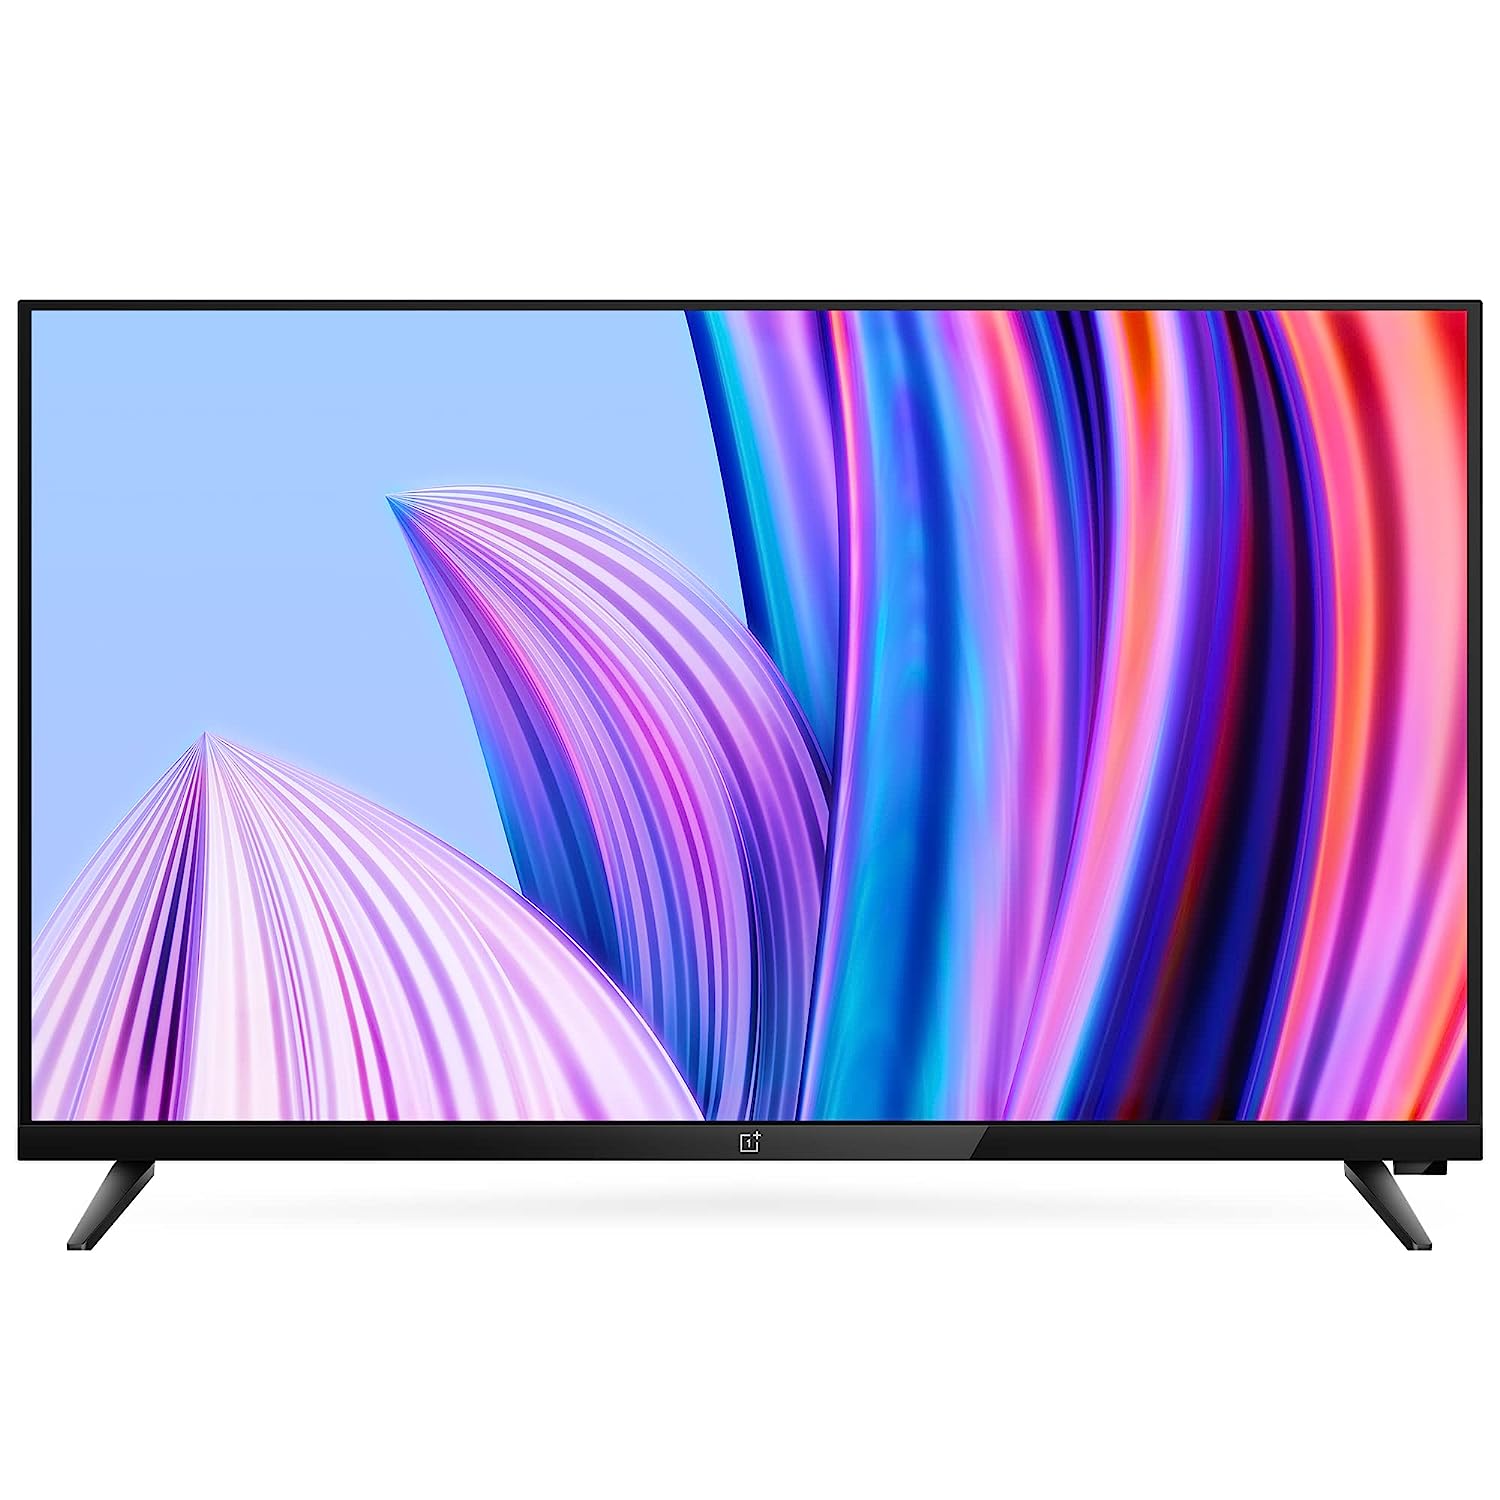 One Plus 32 inches Smart LED TV